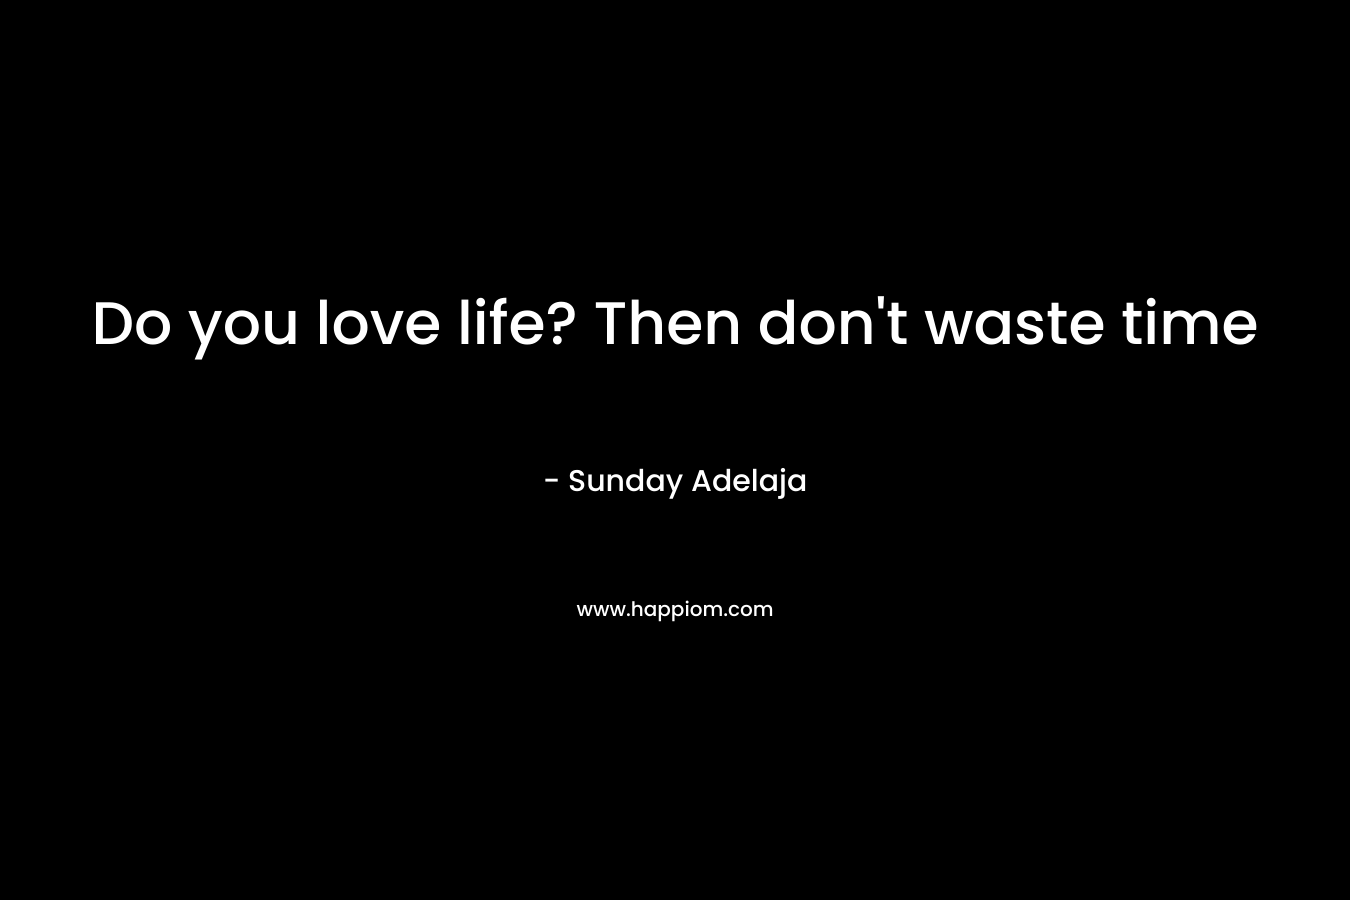 Do you love life? Then don't waste time